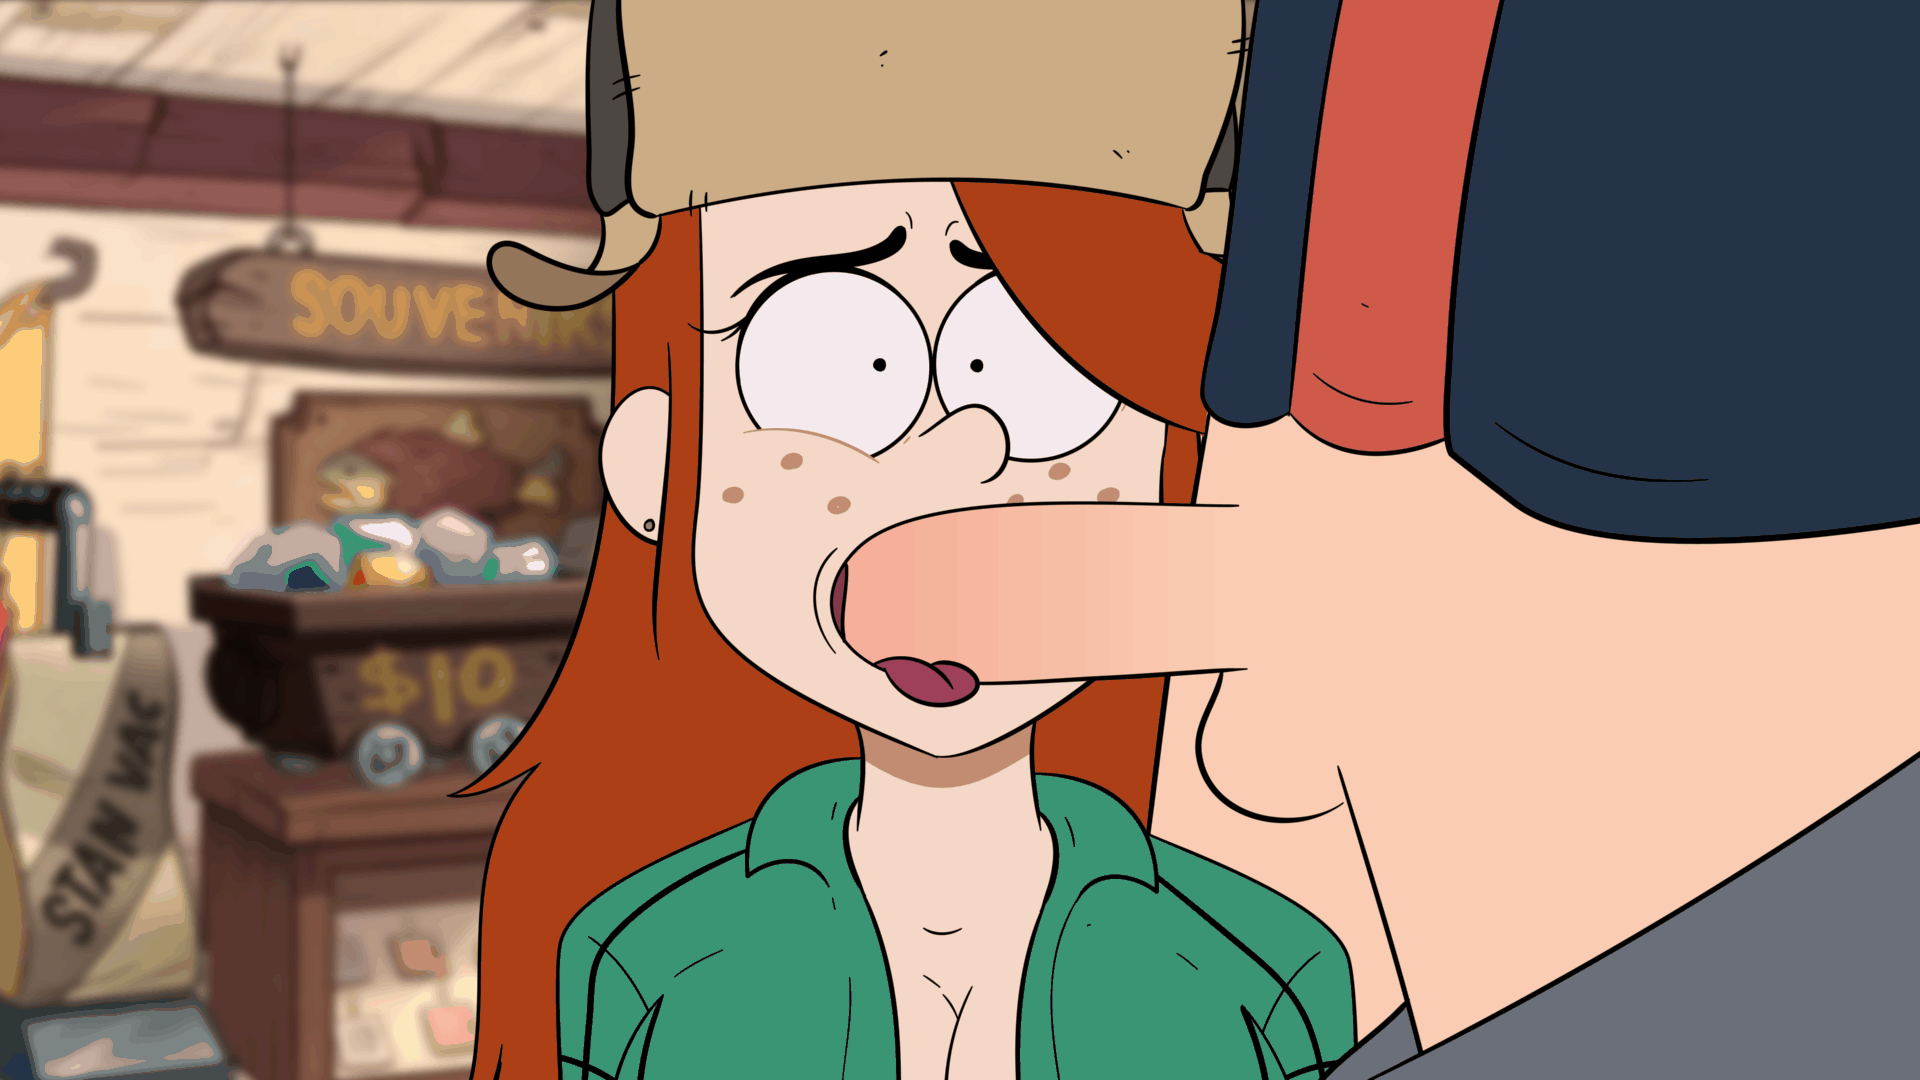 Post 5242812 Animated Dipper Pines Gravity Falls Tagme Wendy Corduroy